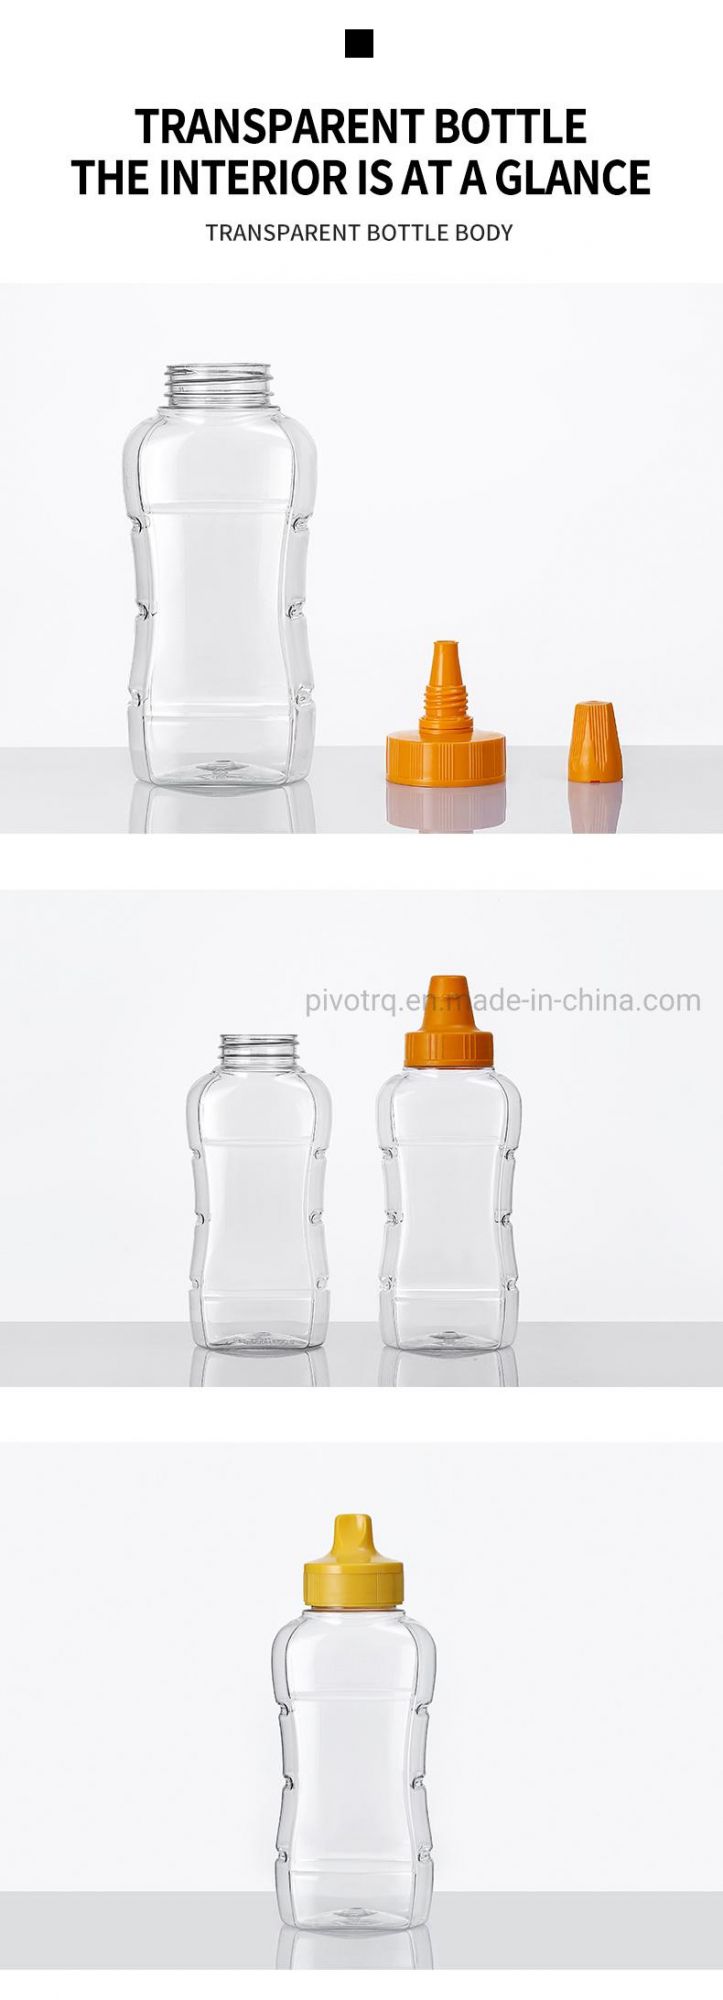 1000g Plastic Squeeze Honey Bottle with 45mm Caps for Honey Packing